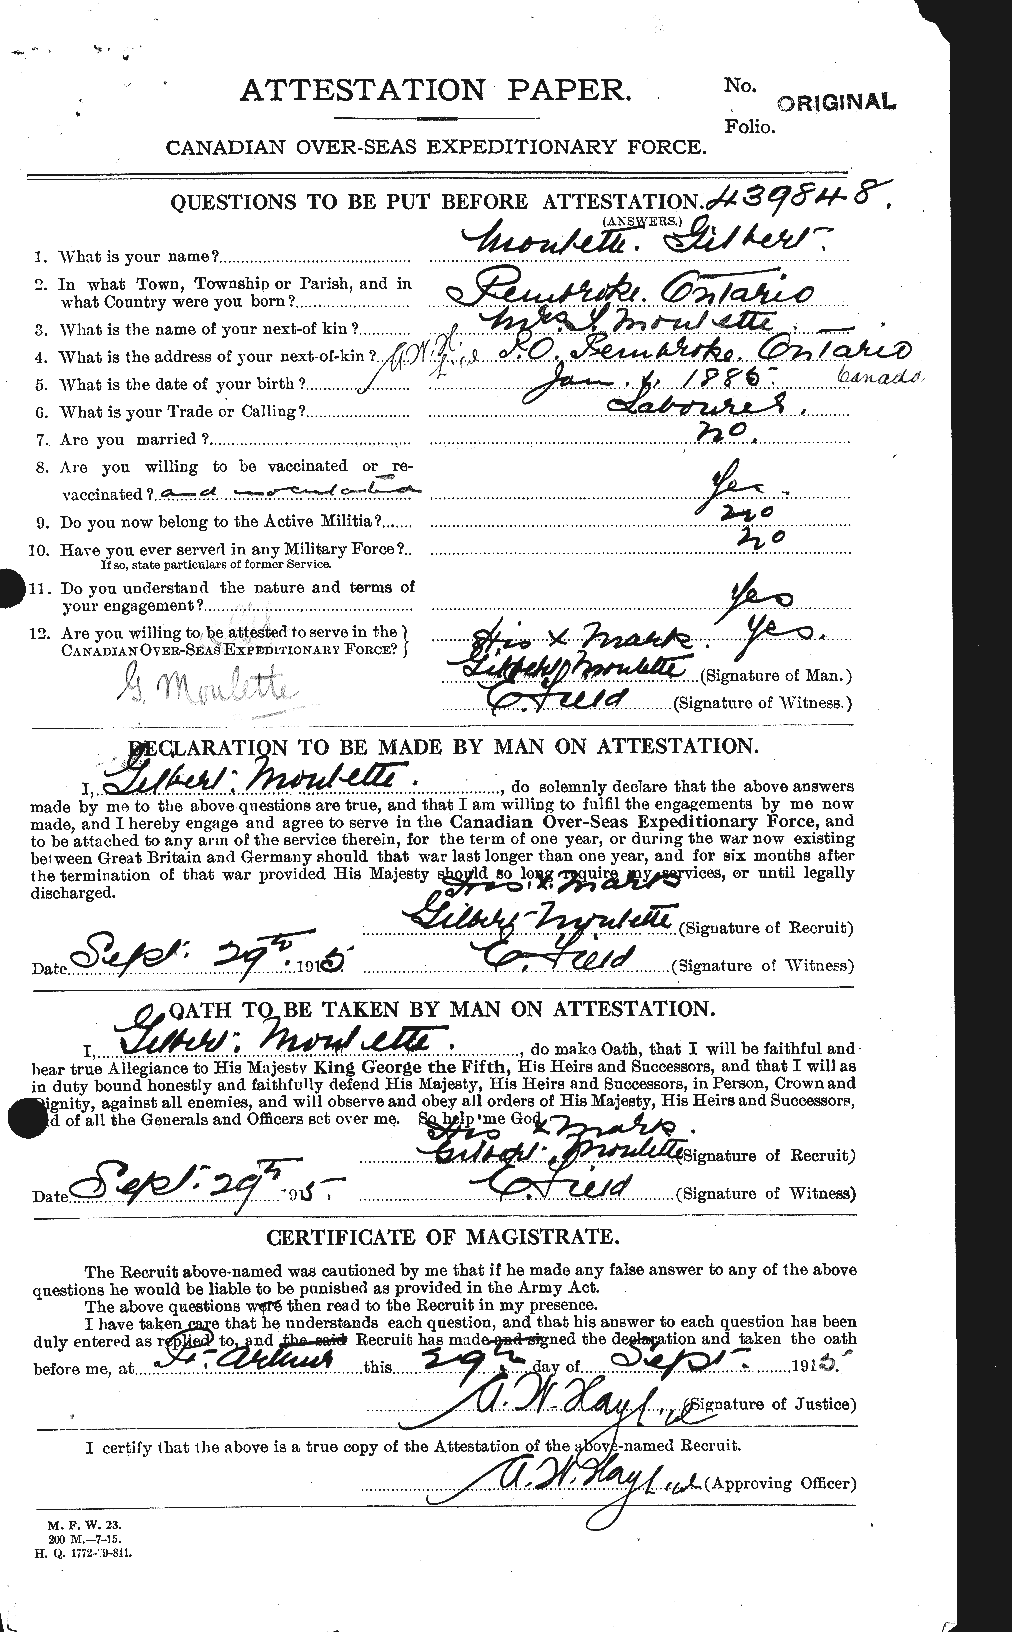 Personnel Records of the First World War - CEF 508398a